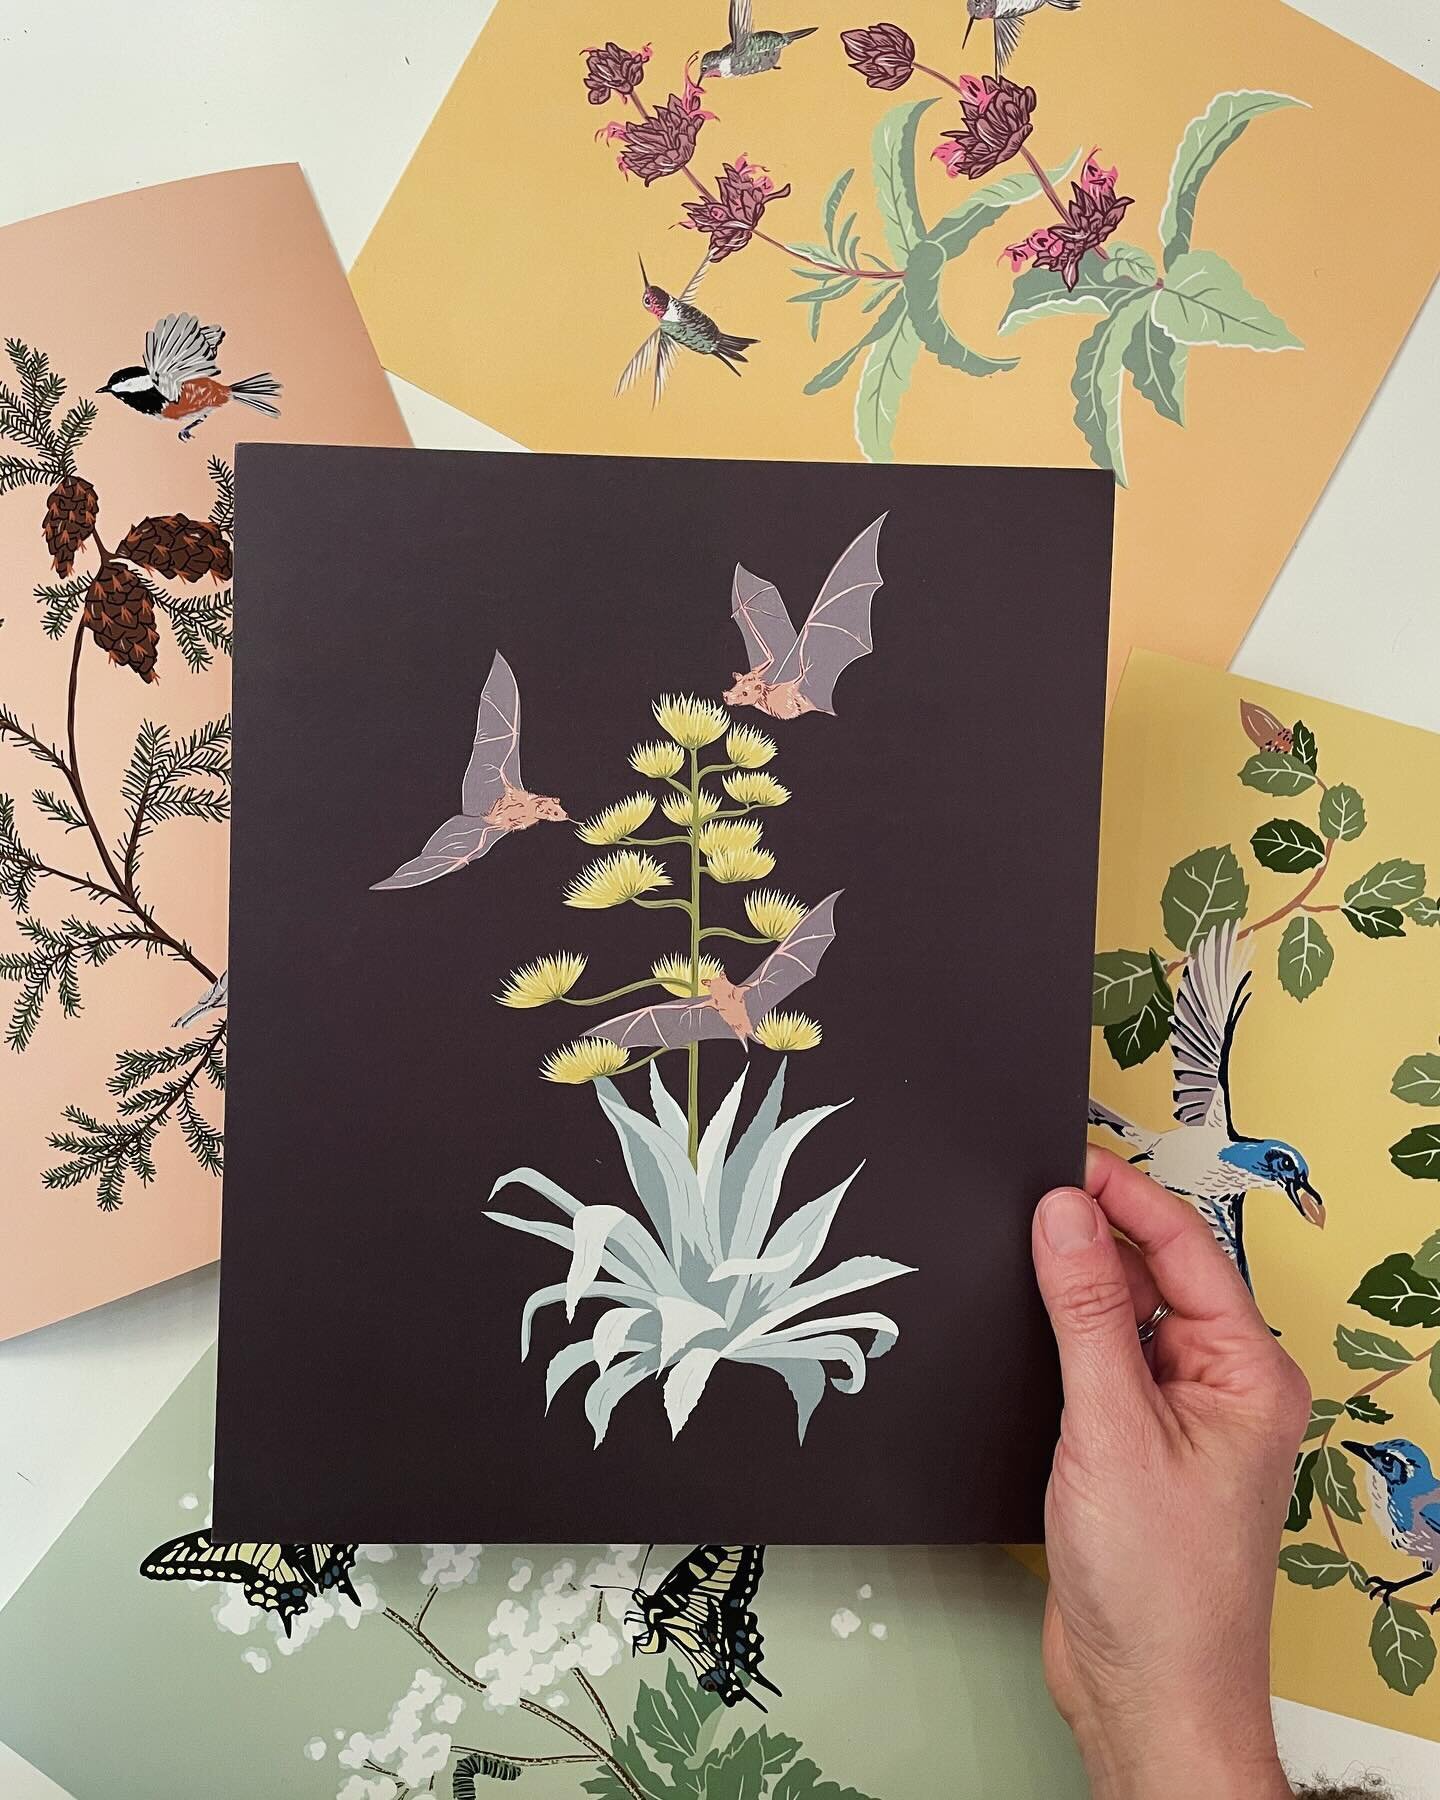 Prints are now live on my site! ✨ Available in 8x10, 11x14, and 16x20 sizes.

Thanks for supporting my small business and being as excited about native plants as I am 🌿💛
.
.
.
#californianativeplants #symbiotics #pollinators #pollinatorplants #bota